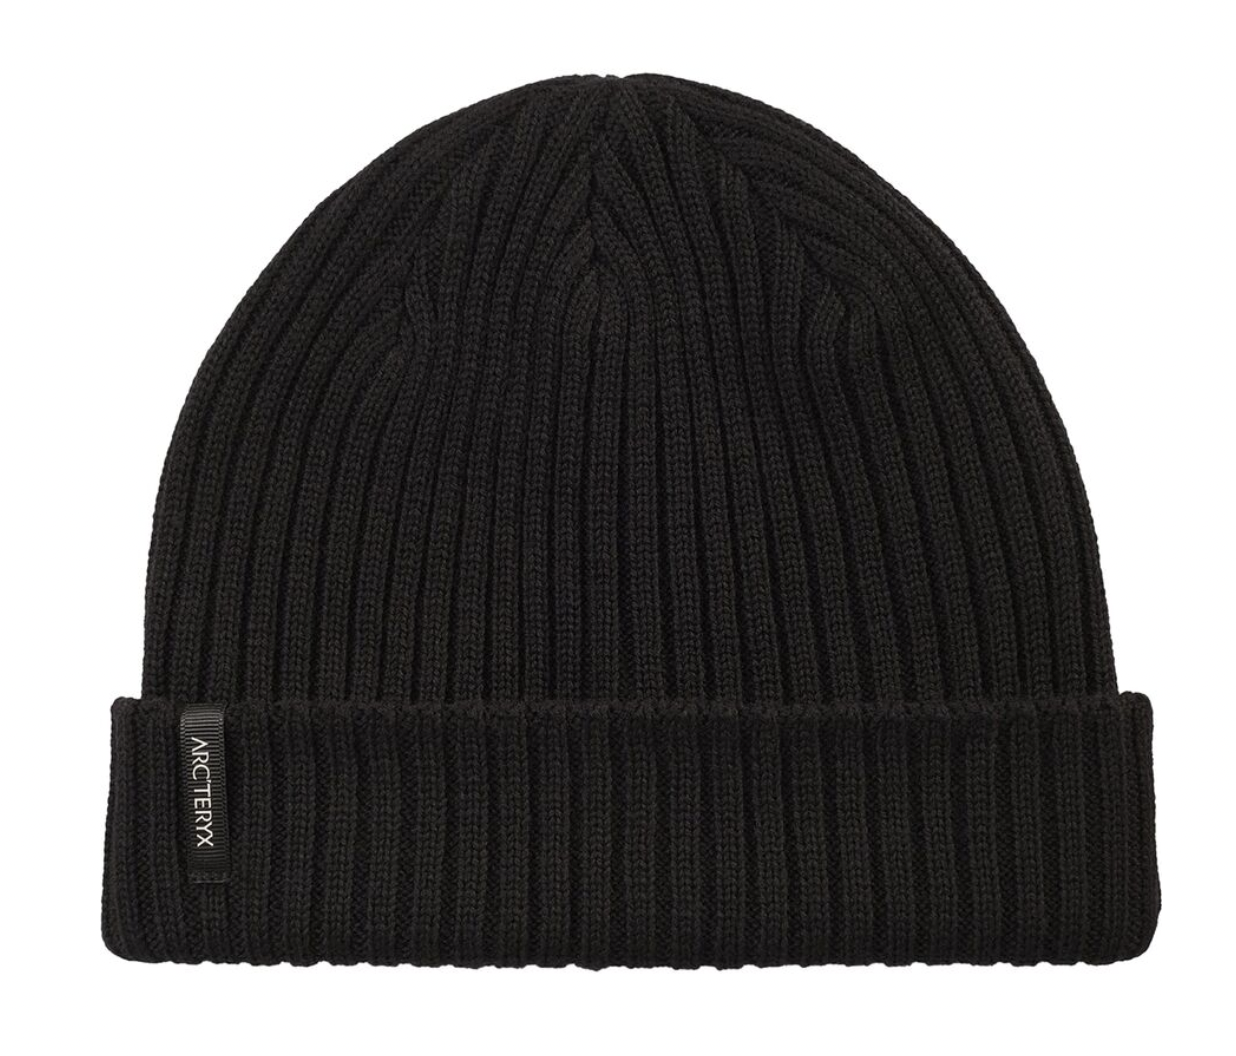 10 Best Winter Hats That Won't Let the Heat Escape 2023 | Well+Good